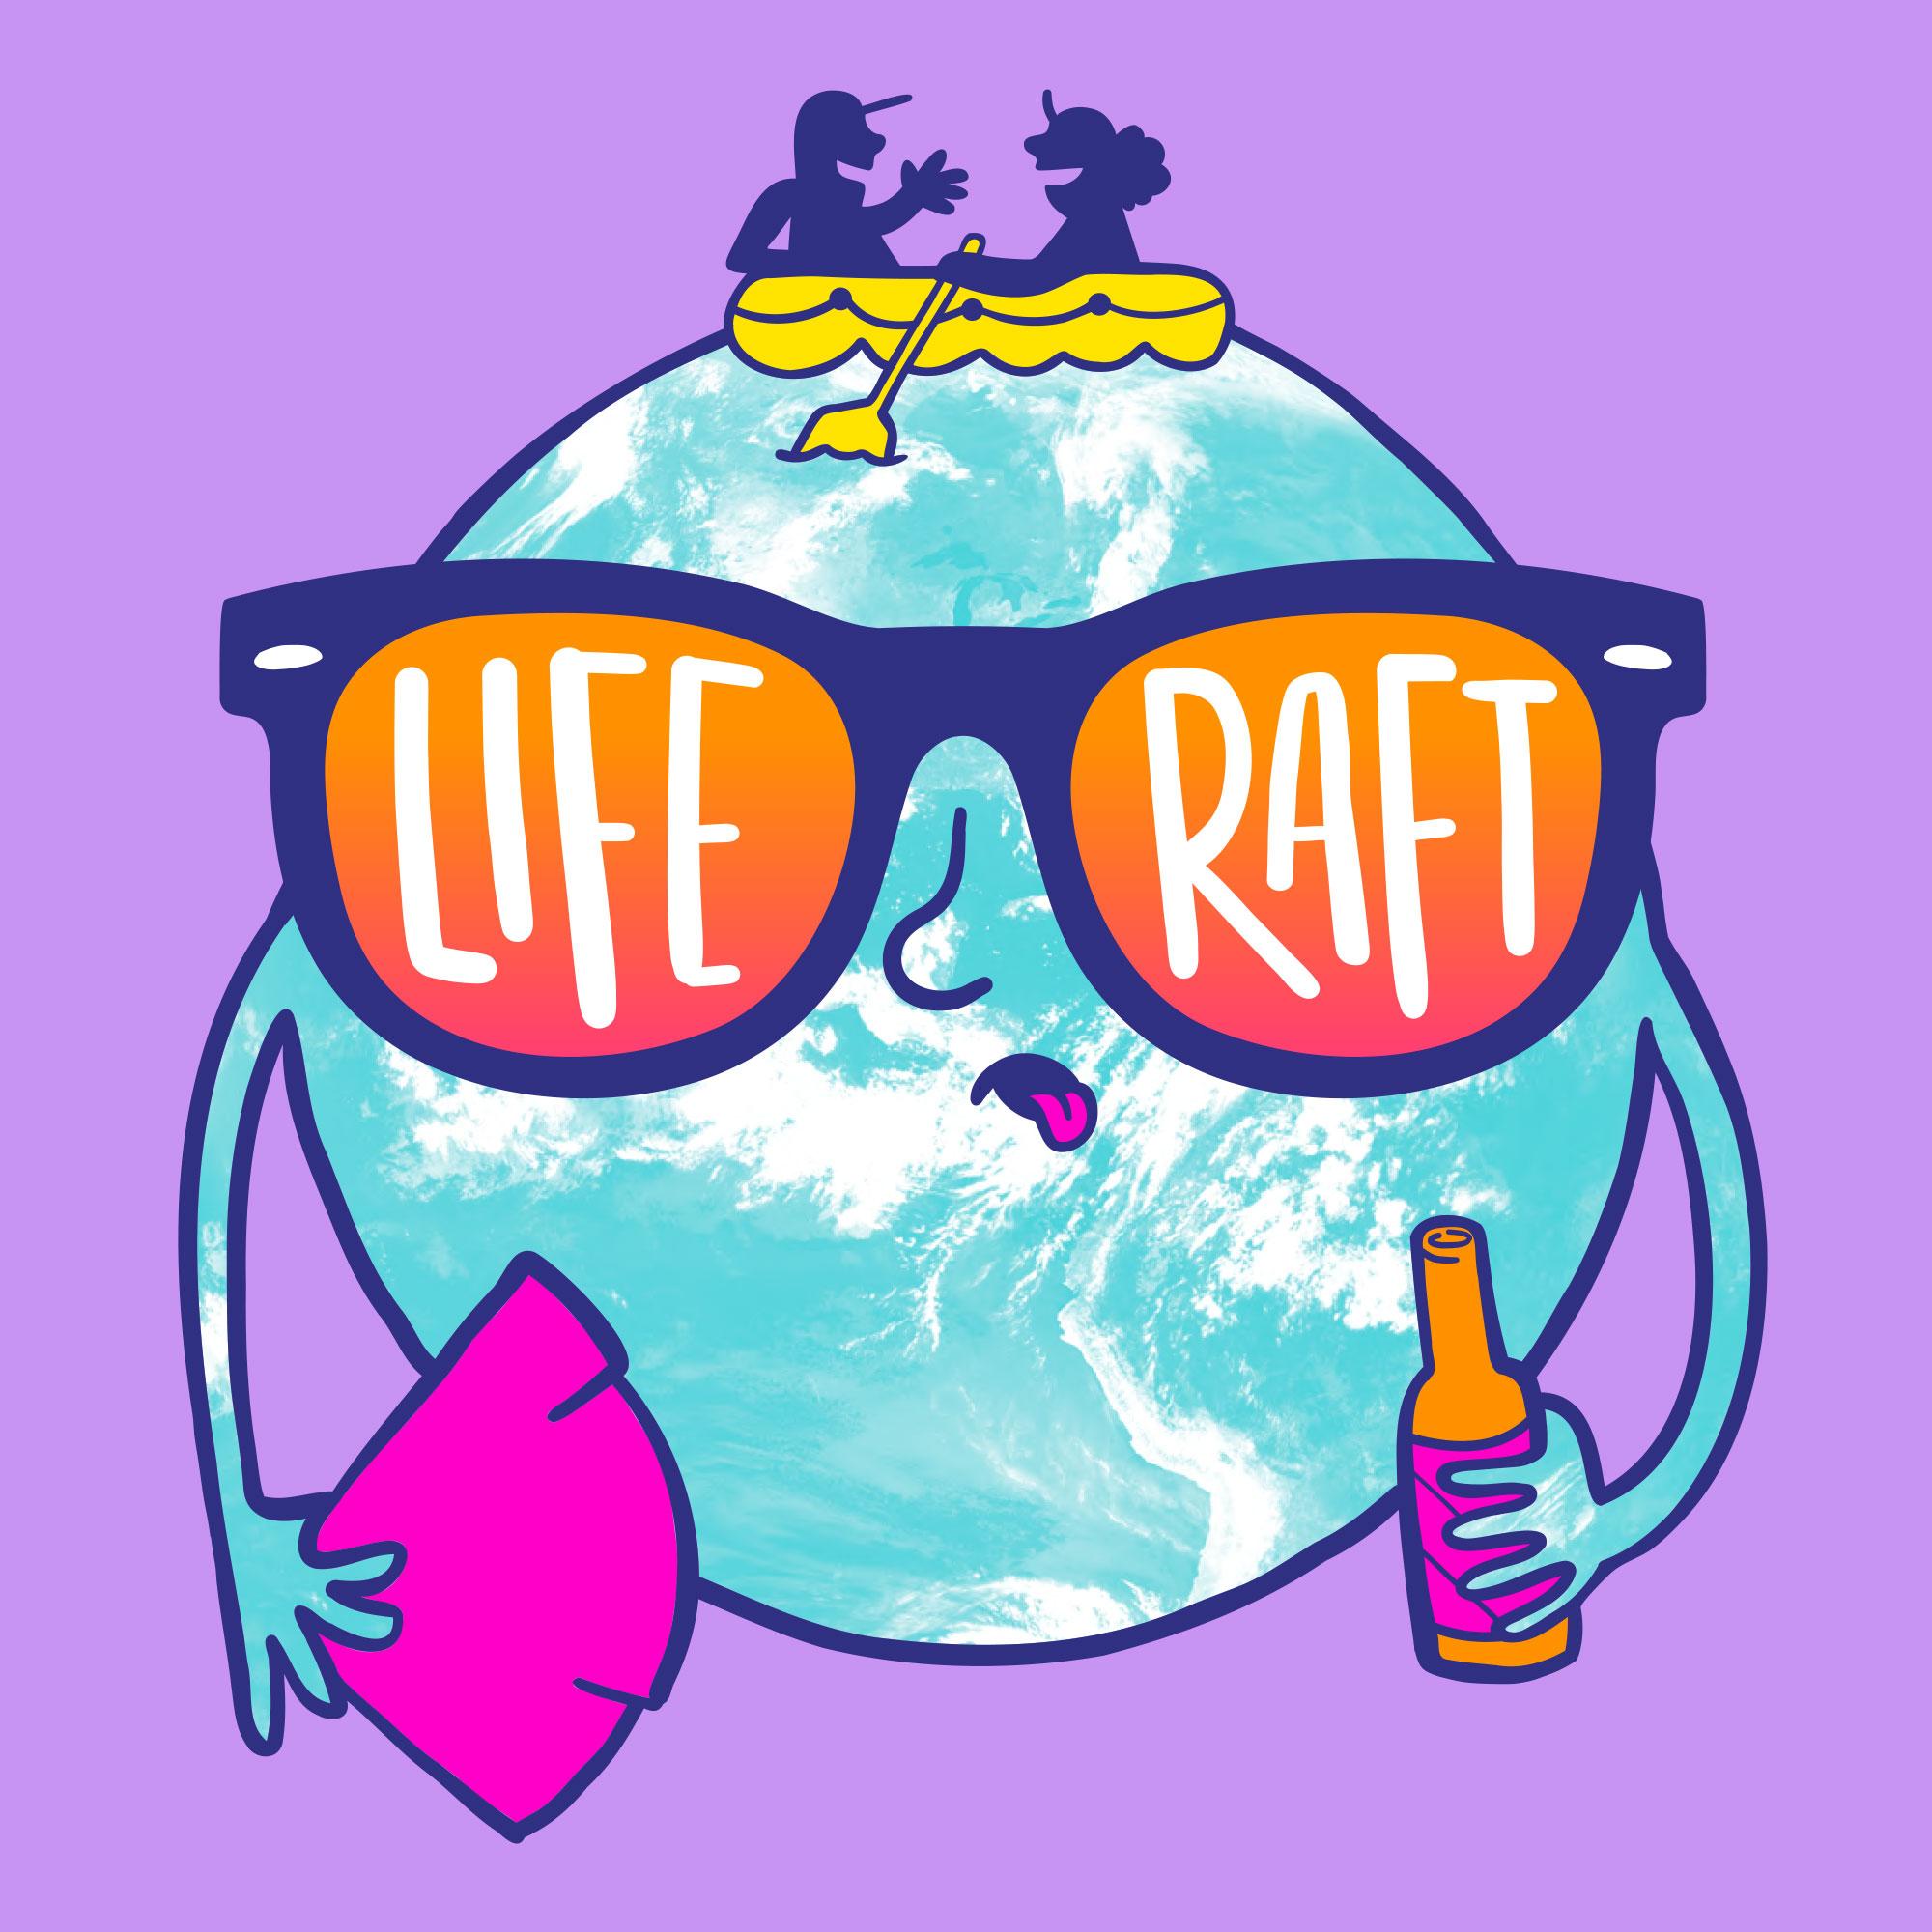 Thumbnail for "Trailer: Welcome To Life Raft".